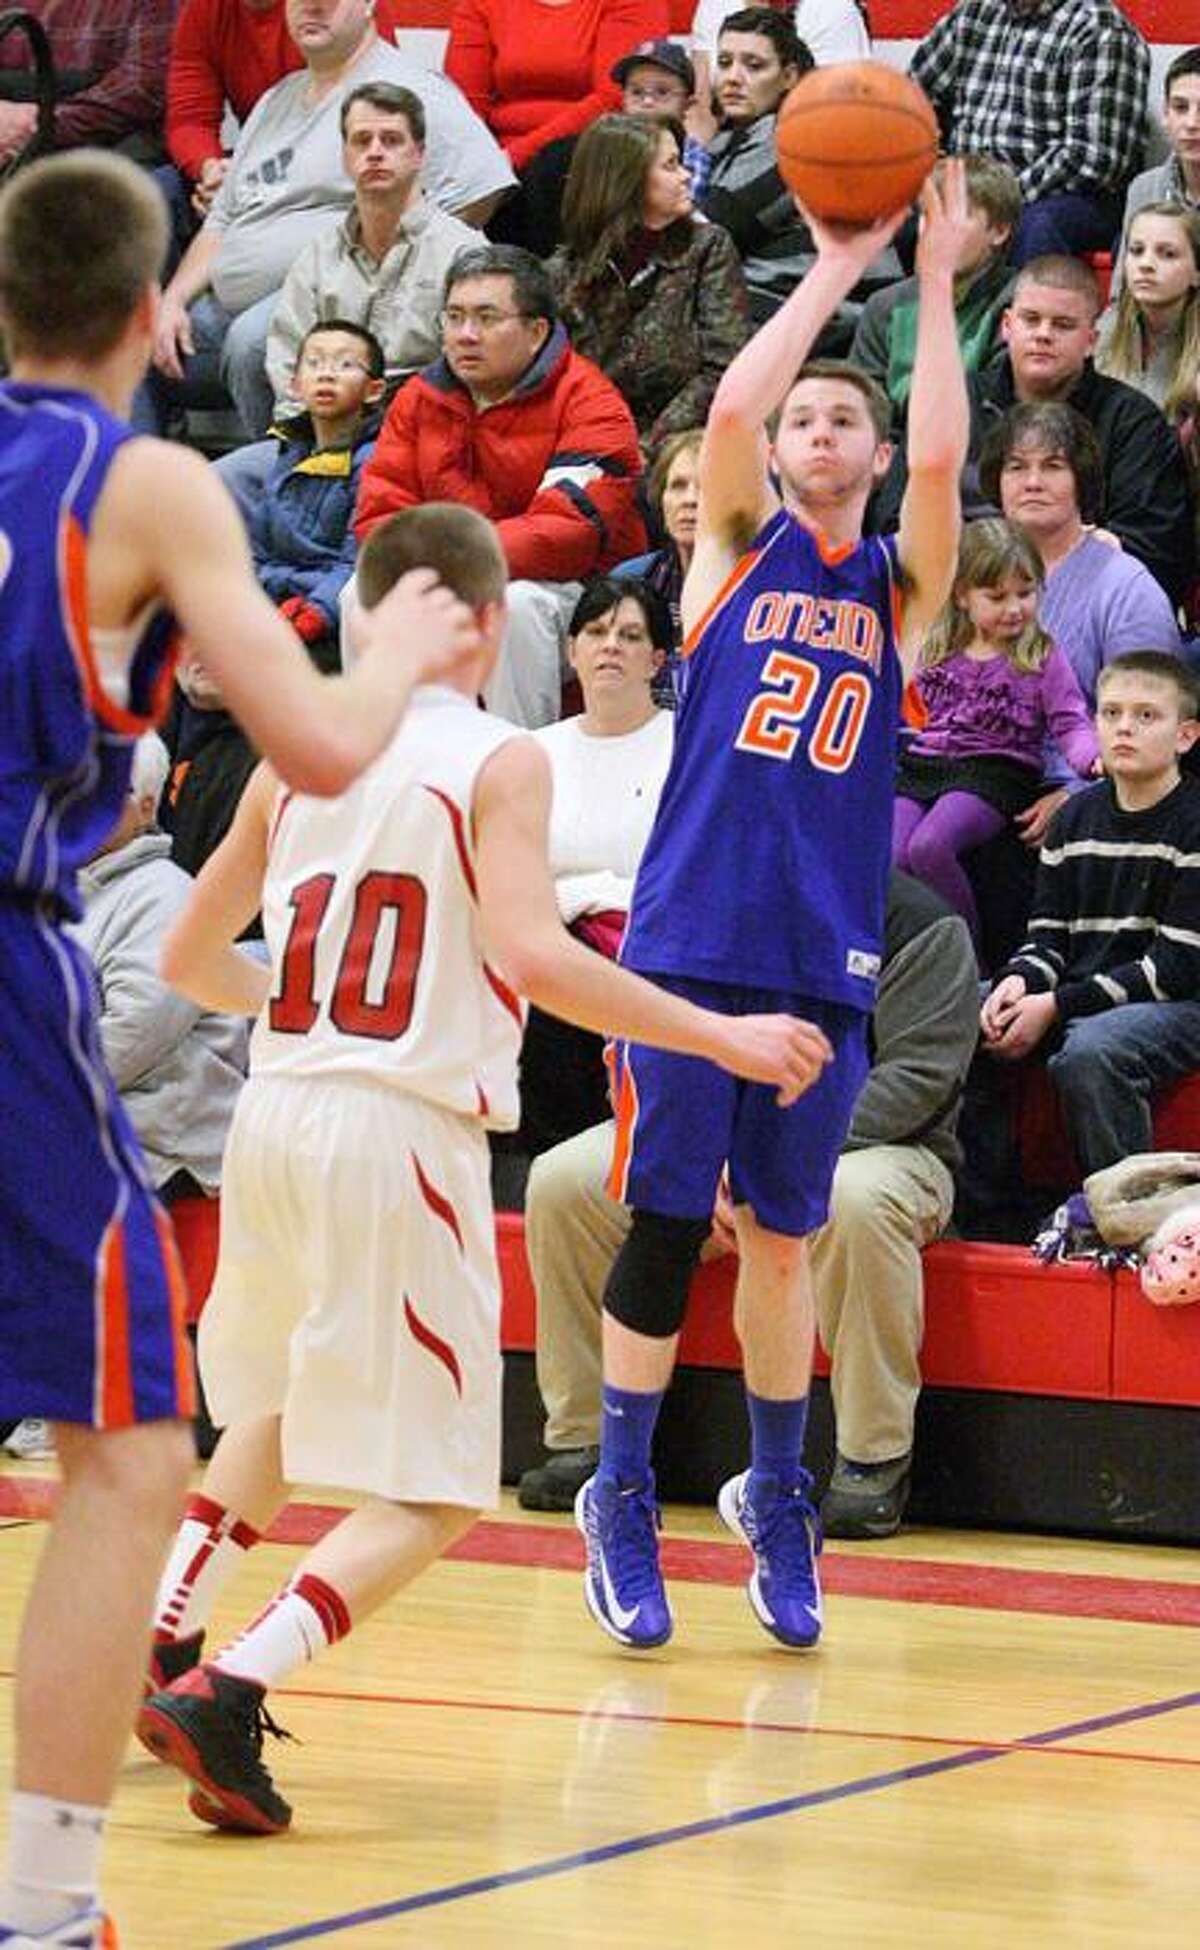 JOHN HAEGER @OneidaPhoto on Twitter/ONEIDA DAILY DISPATCHOneida's Lucas Durant puts up a shot against VVS. Durant was named to the All TVL Second Team.